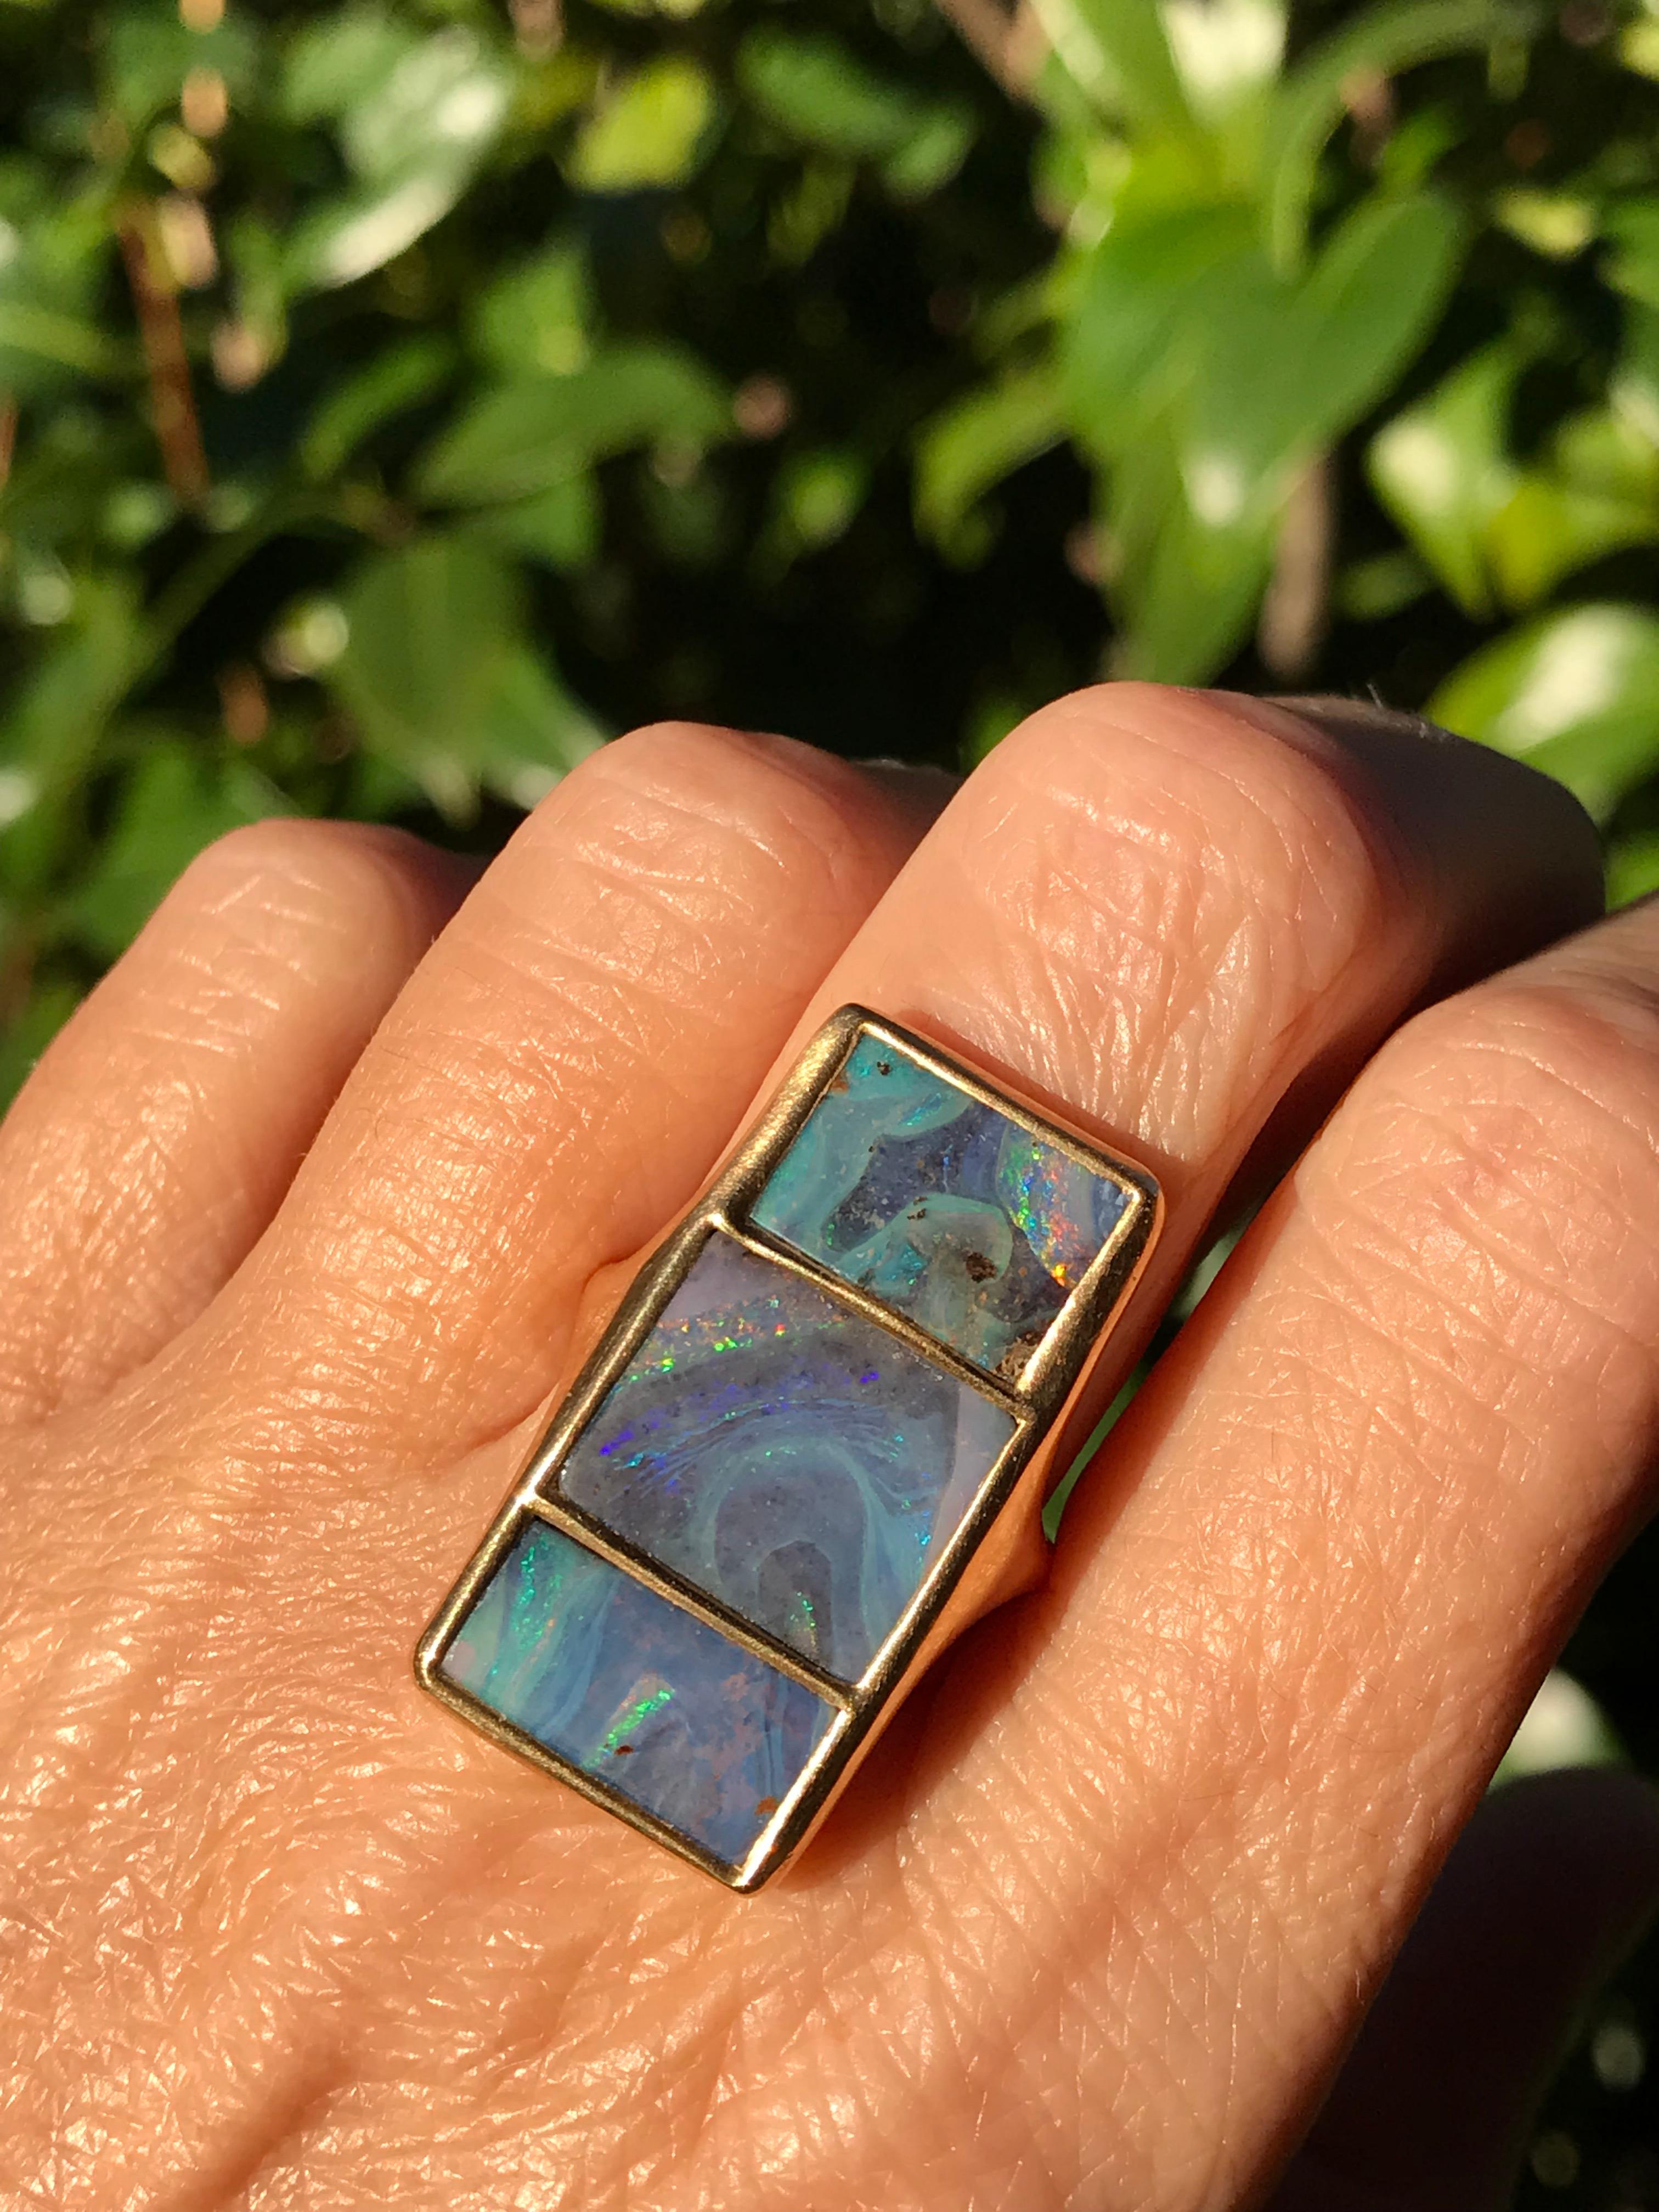 Dalben design One of a kind 18k yellow gold matte finishing ring with three  bezel-set Australian Boulder Opals.
Total opals weight  9,6 carat 
Ring size 7 1/4 - EU 55 re-sizable to most finger sizes. 
Bezel setting dimension: width 15 mm, height